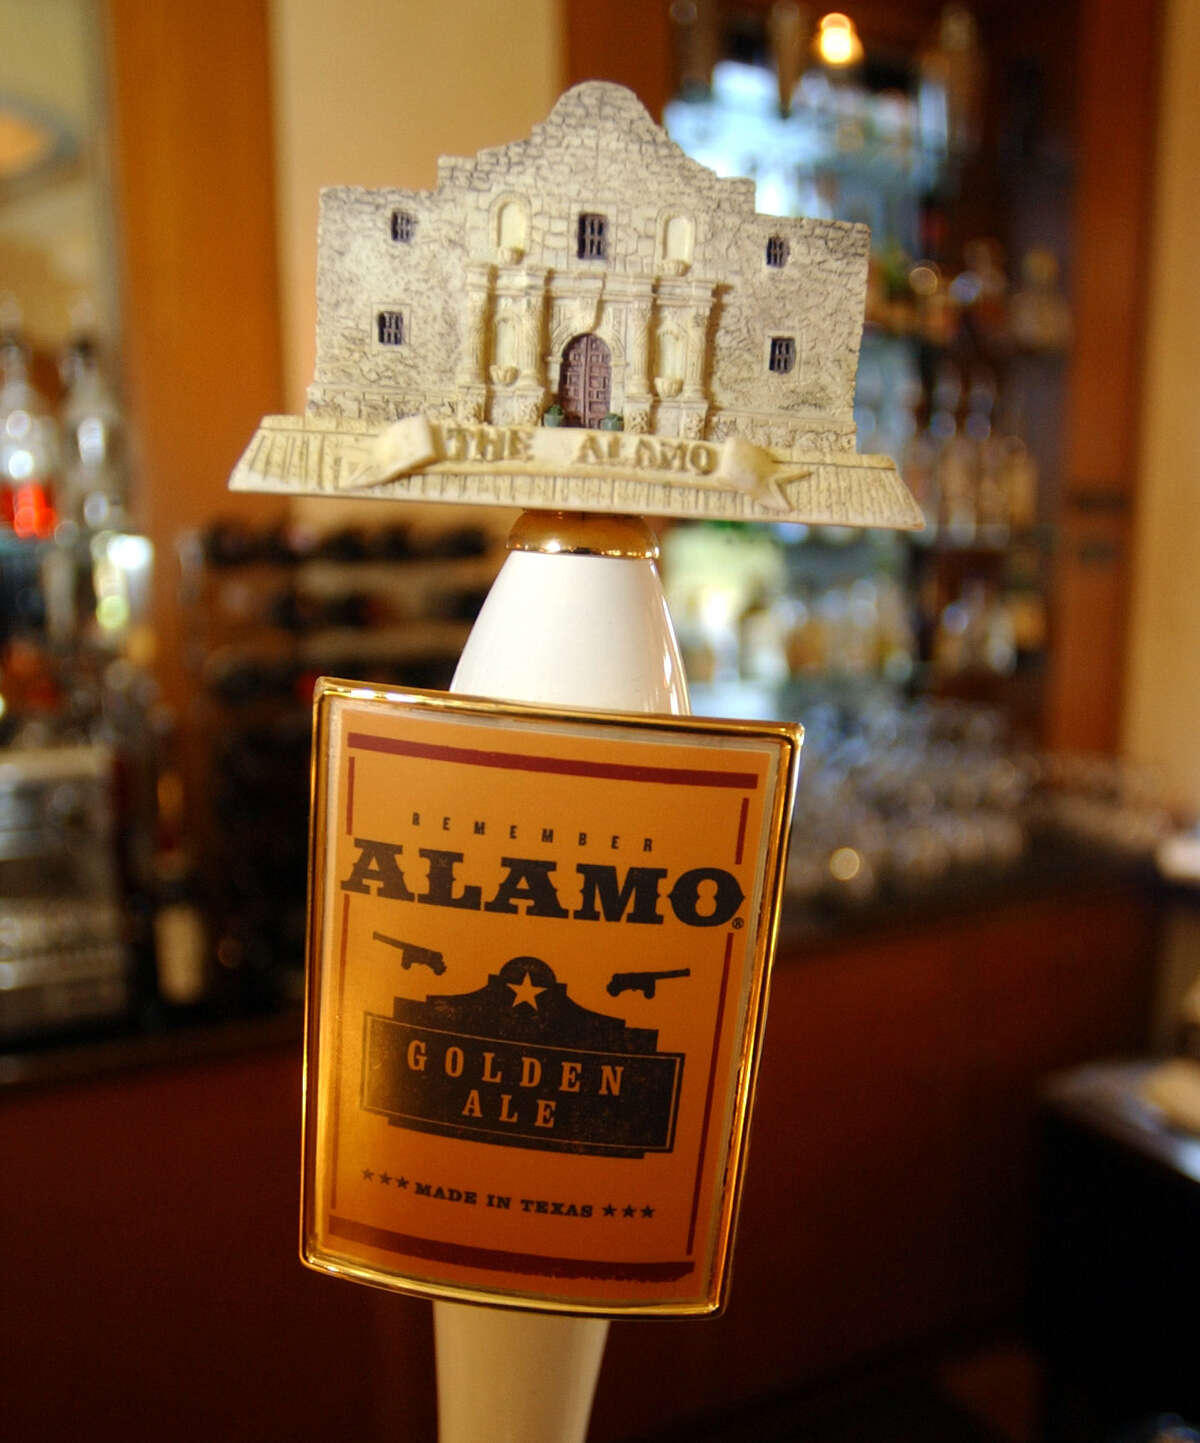 The Alamo Beer Co.'s blonde ale will be joined by other brews once its local facility opens.